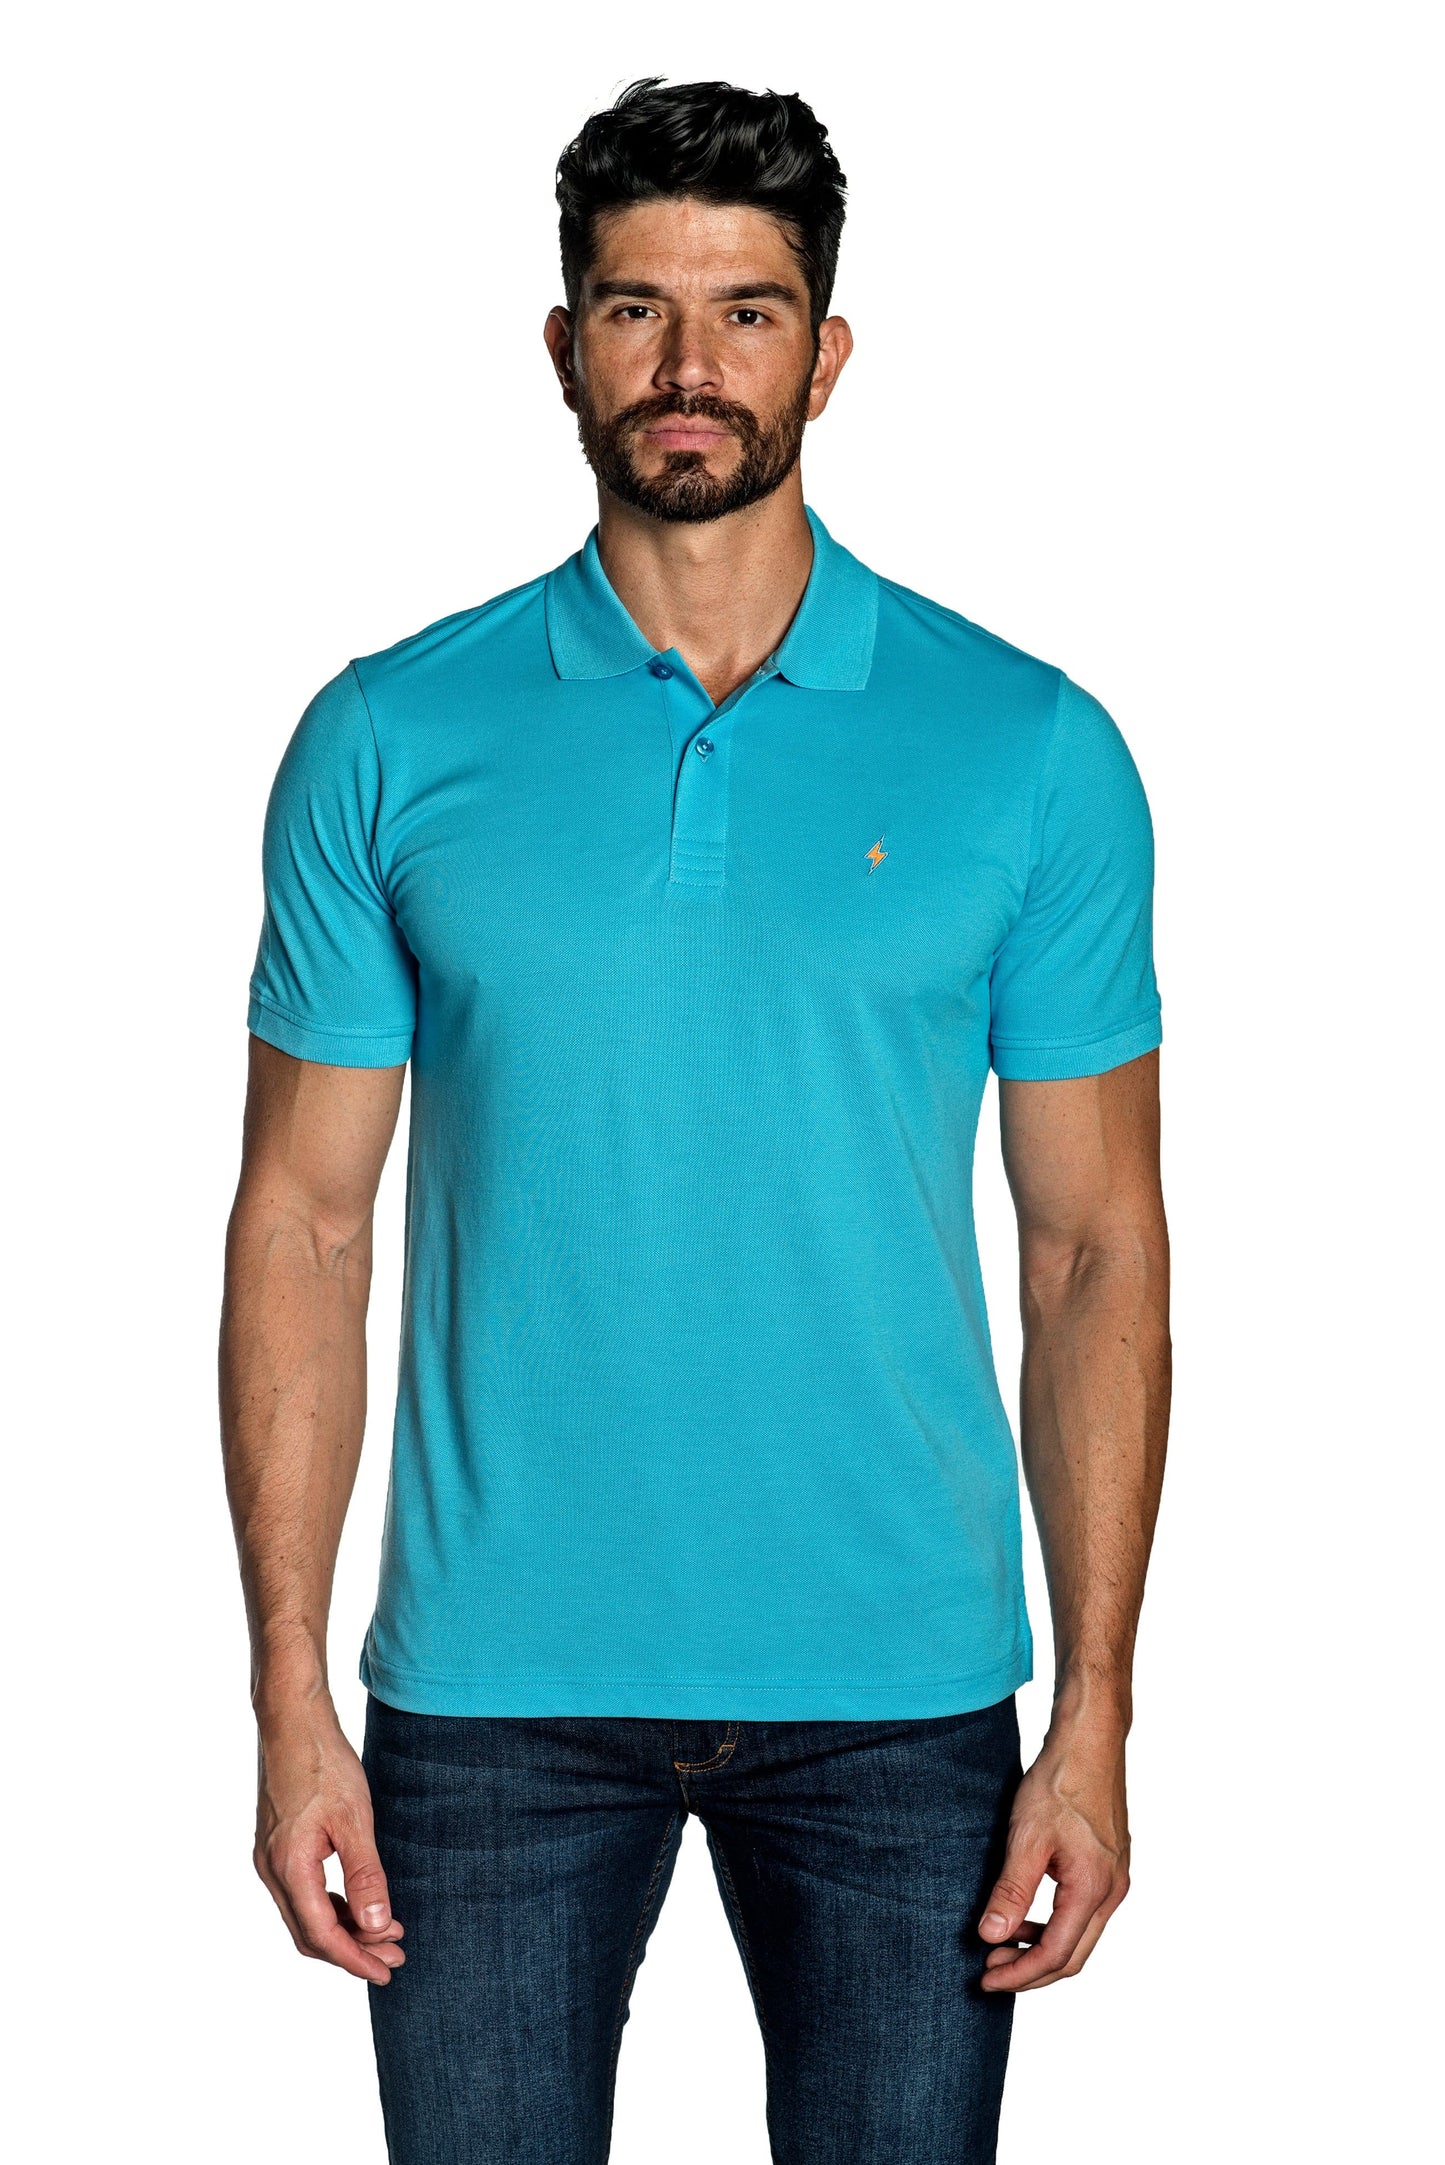 Turquoise Mens Polo With Lightning Embroidery P-32.